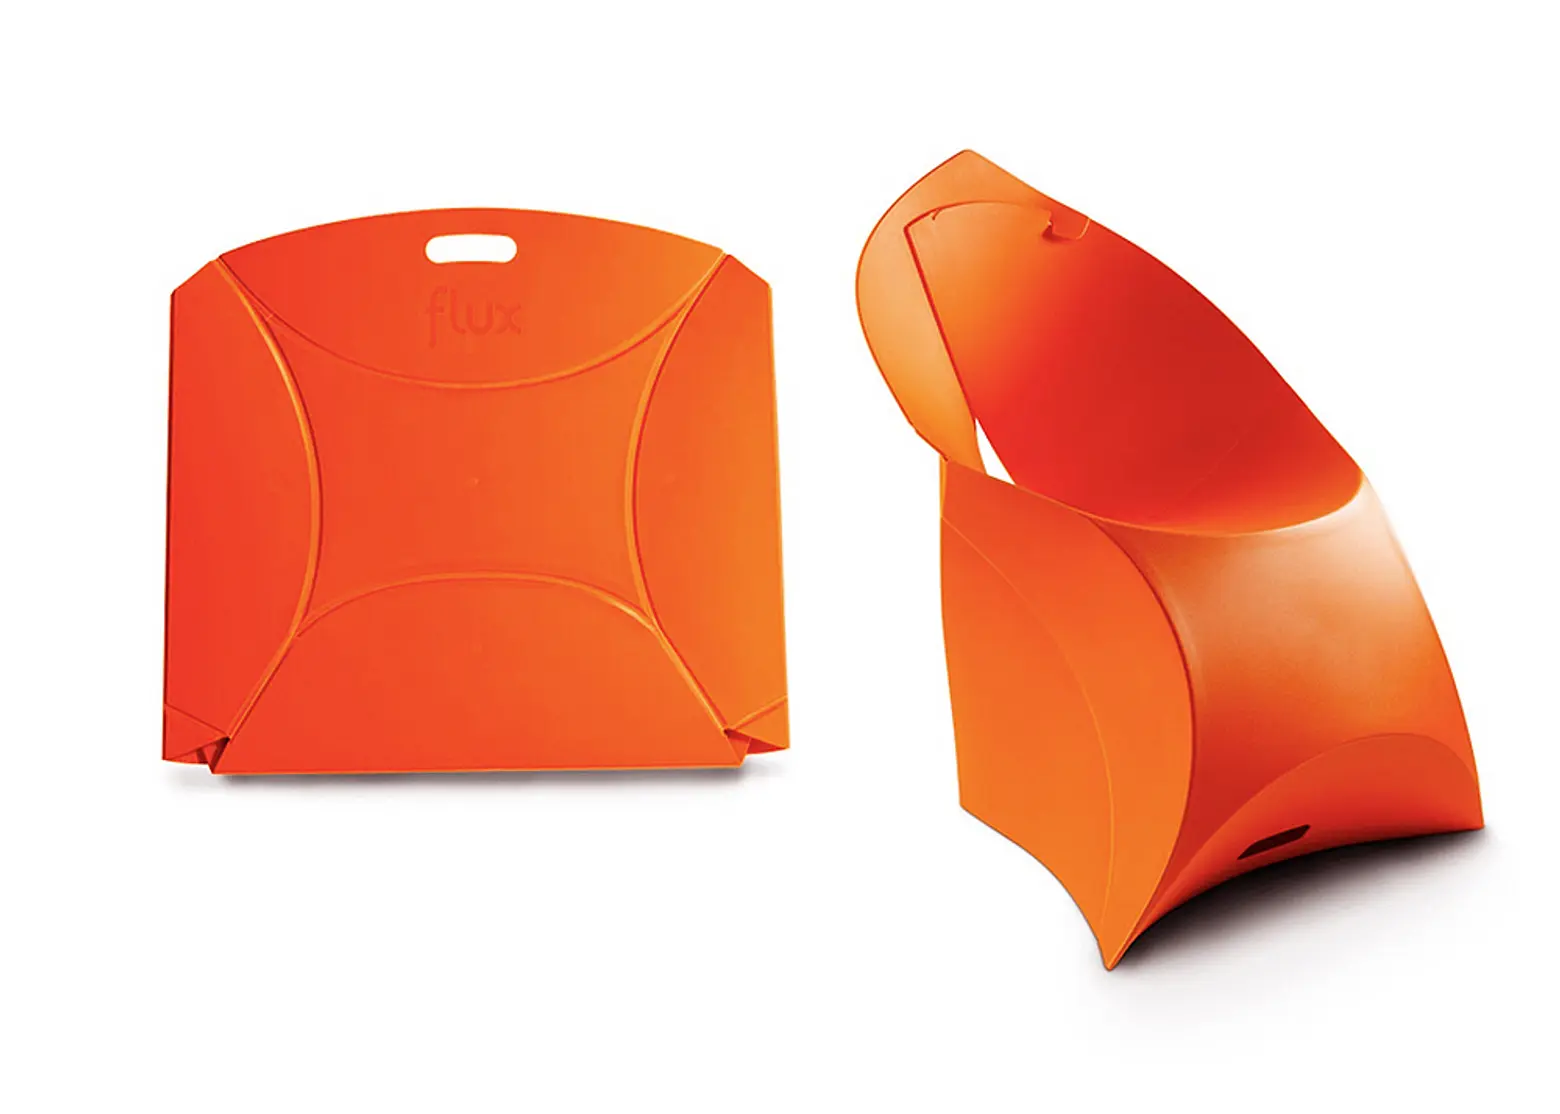 Flux Chair: A Colorful Plastic Seat That Can Fold Up in Just 10 Seconds